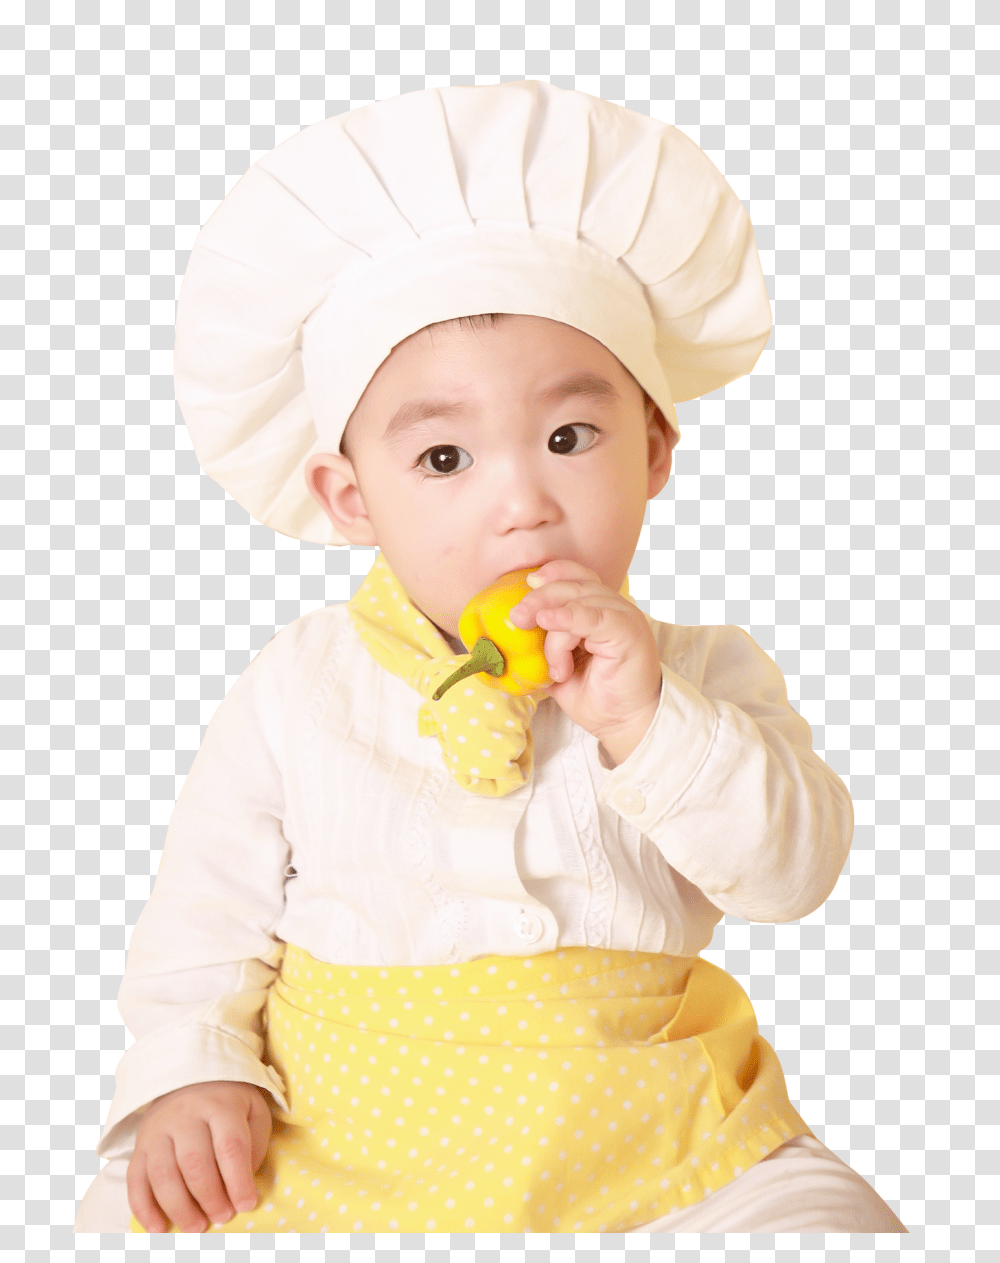 Little Cute Child In Costume Of Cook Image, Person, Apparel, Bonnet Transparent Png